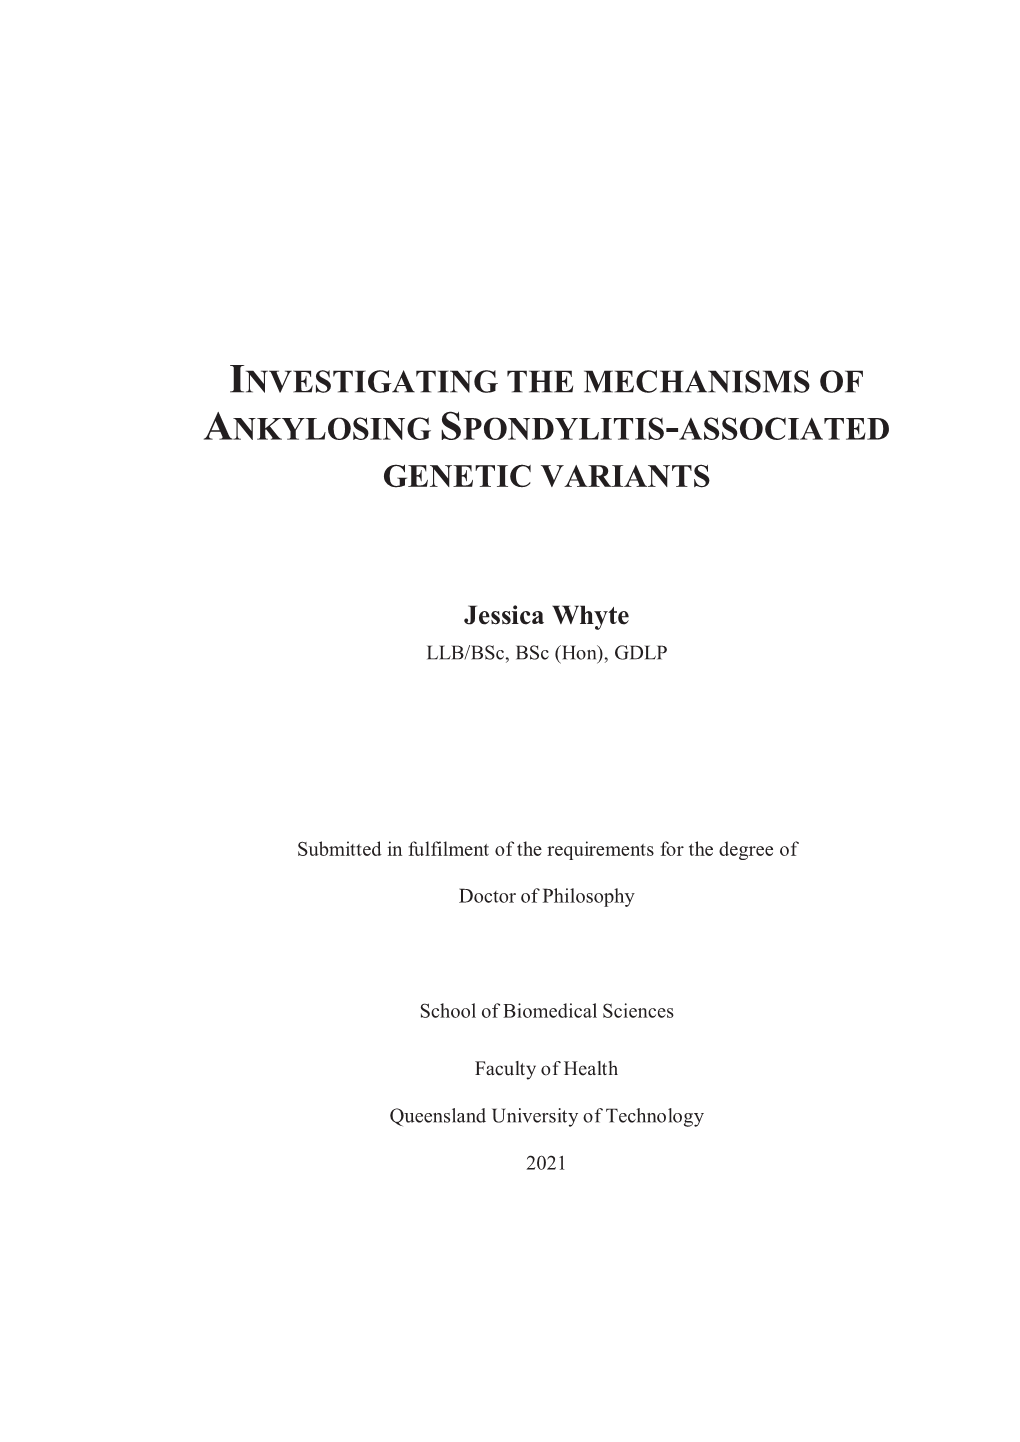 Jessica Whyte Thesis (PDF 7MB)